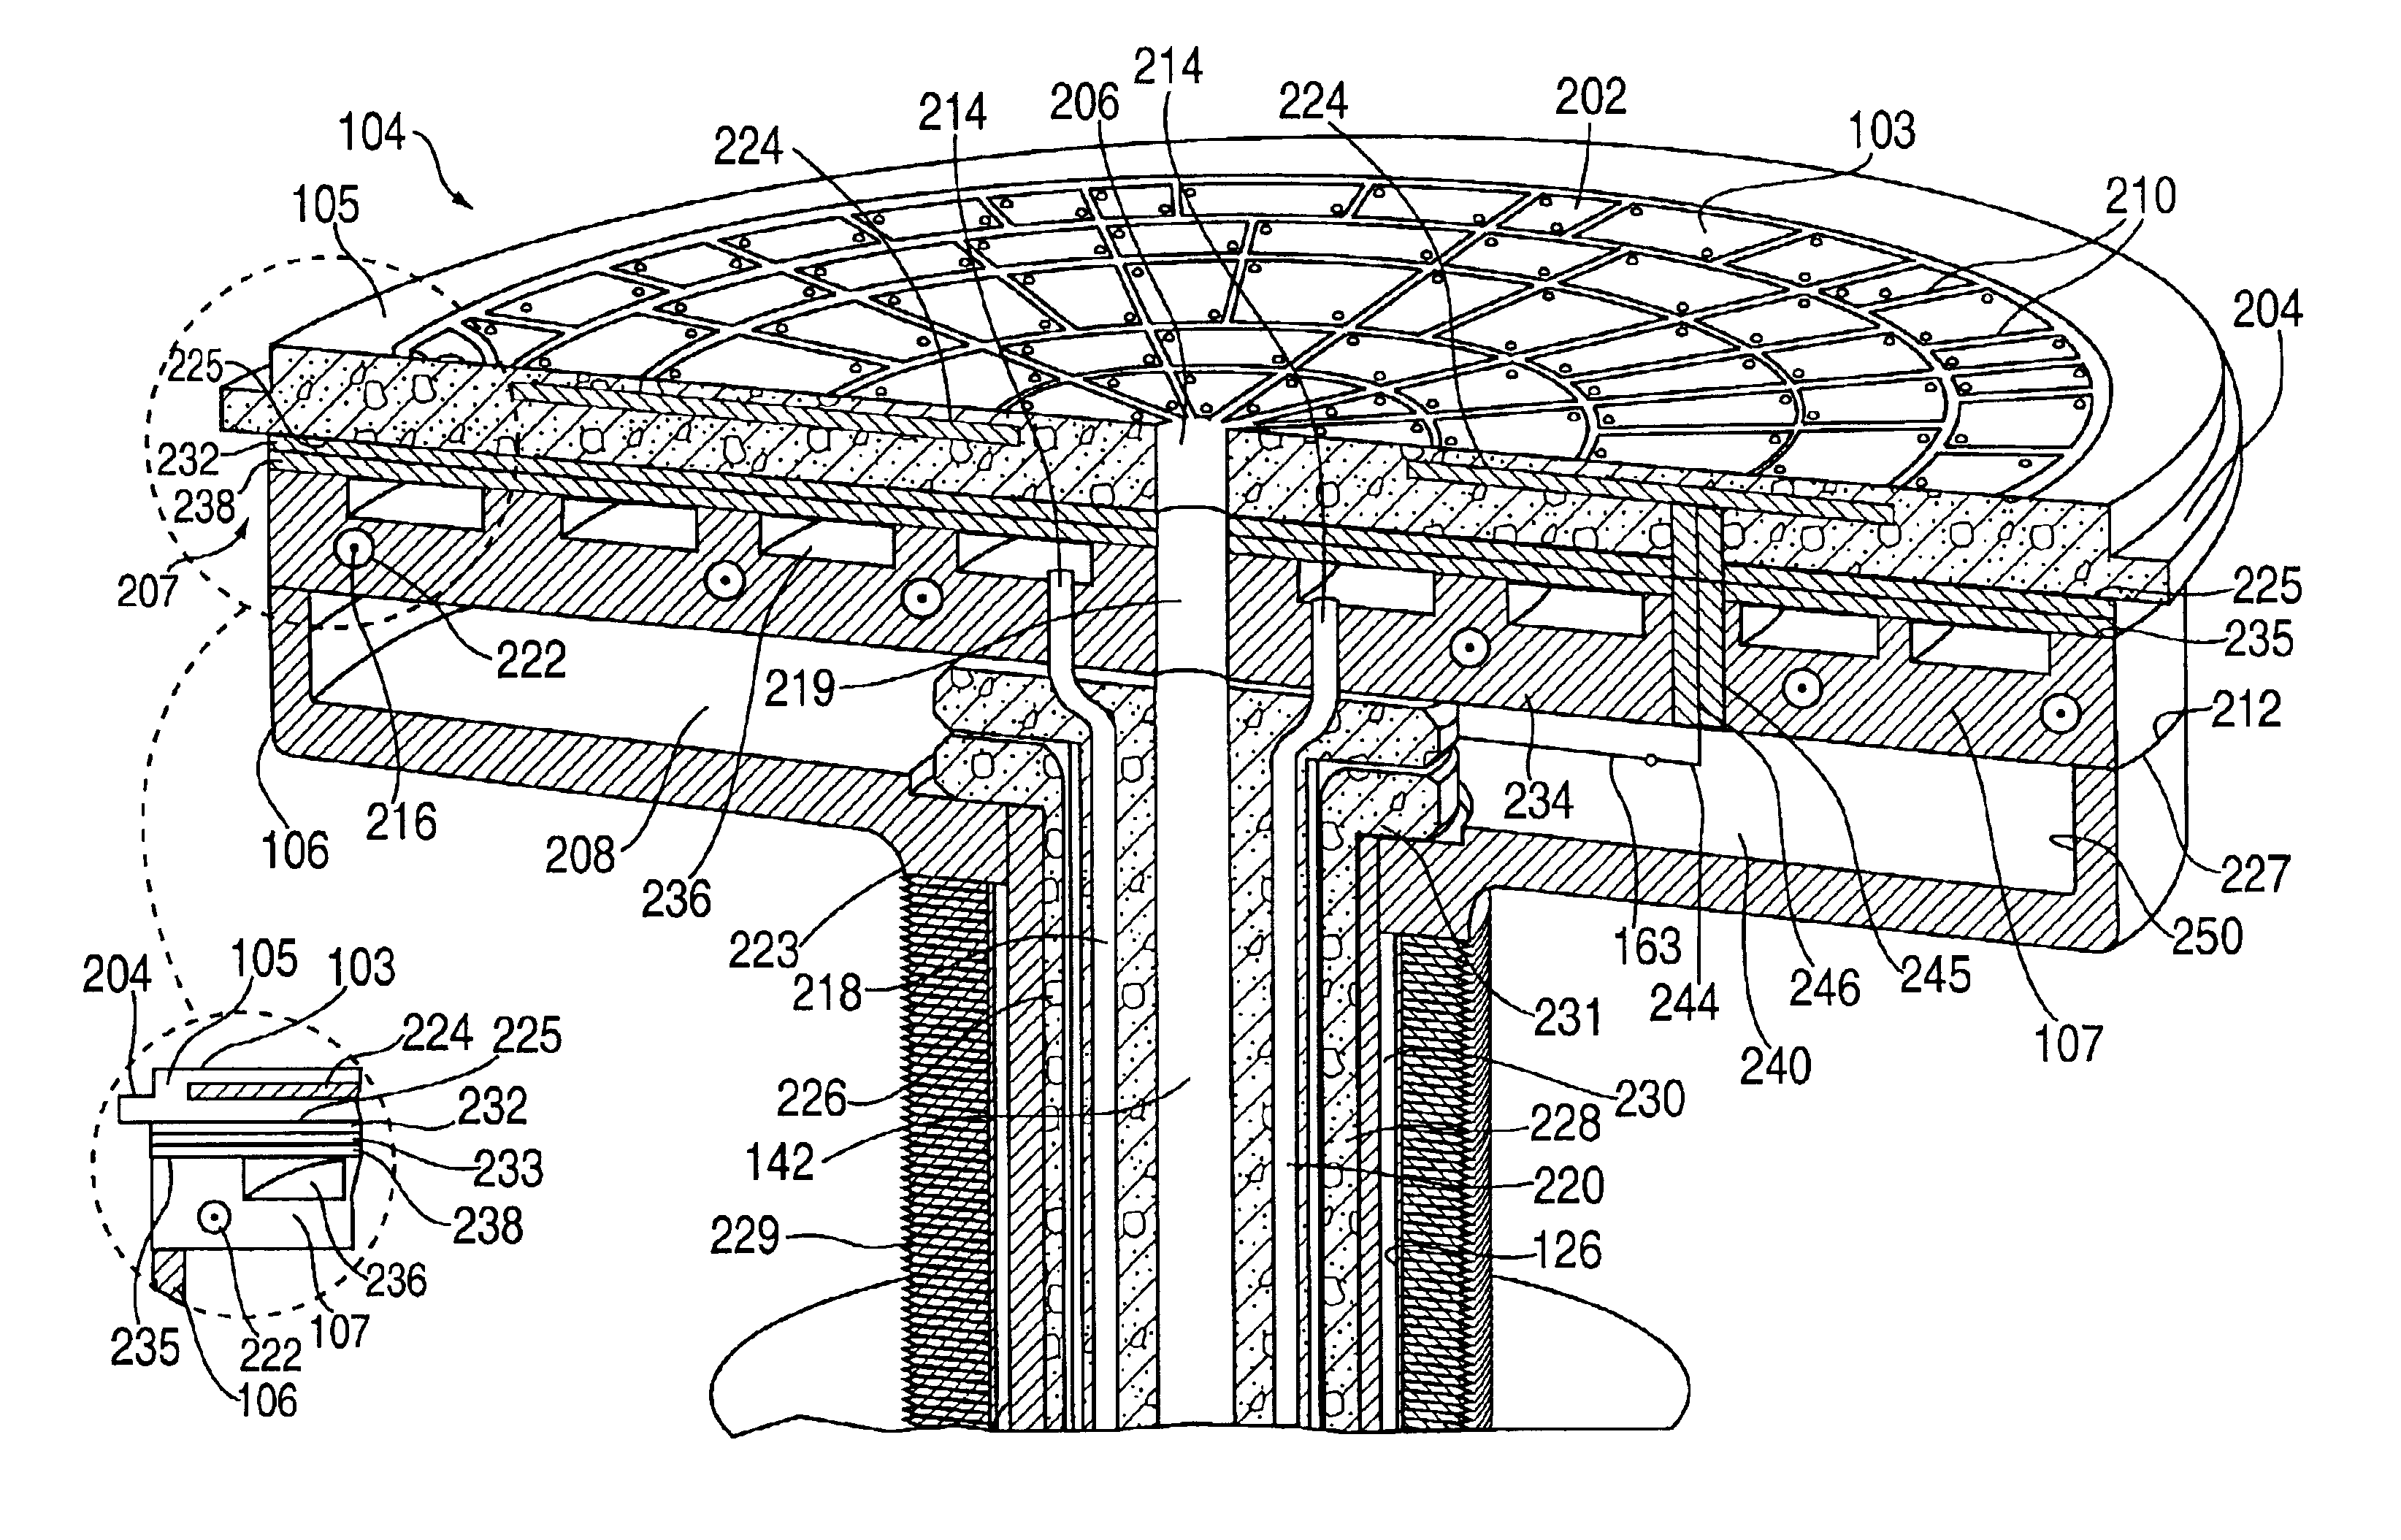 Full area temperature controlled electrostatic chuck and method of fabricating same